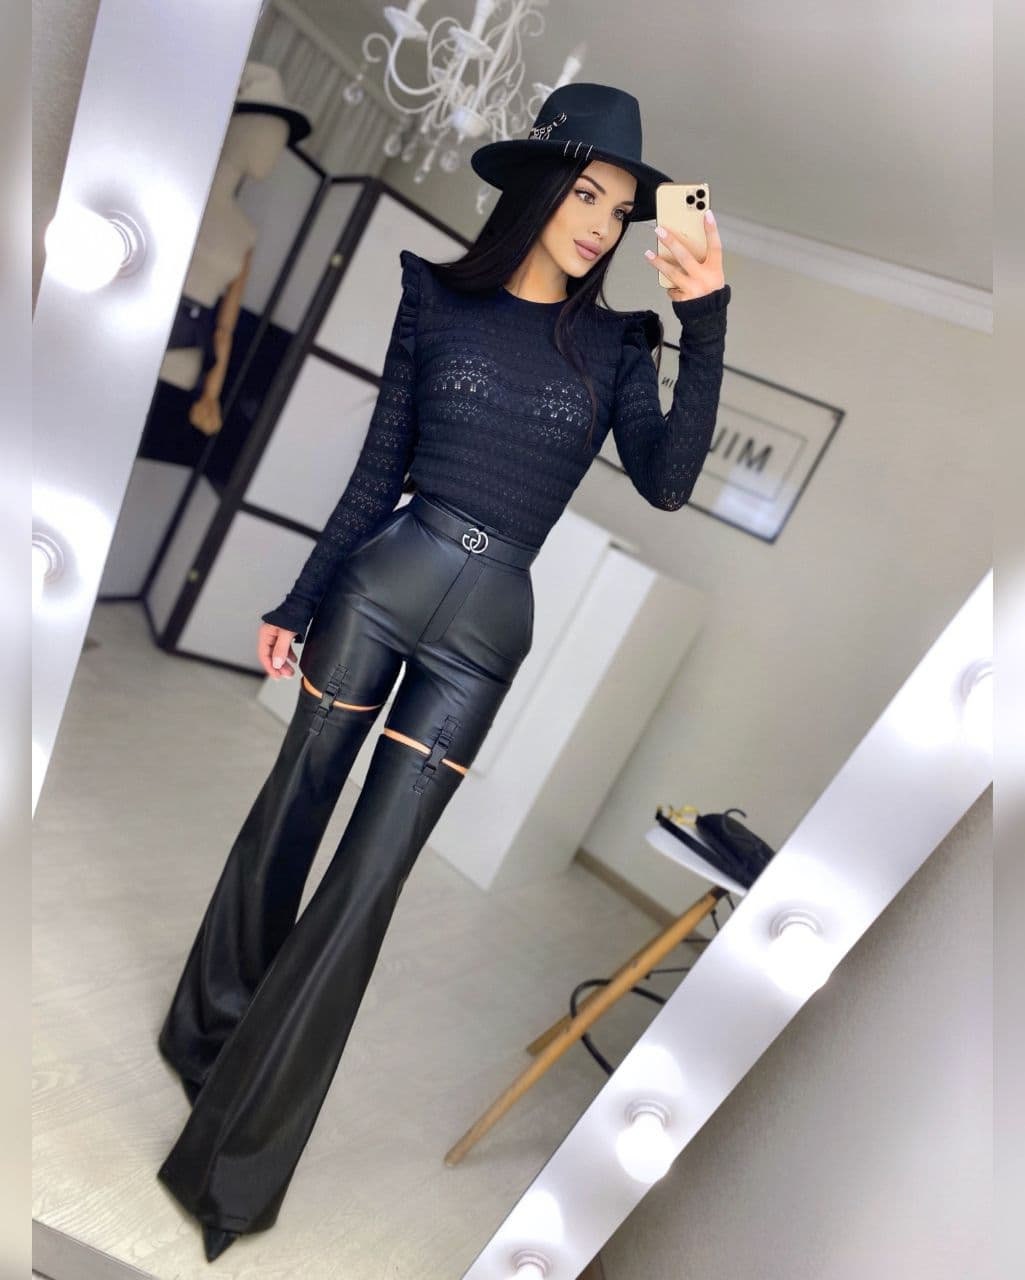 Vegan Leather Pants Women, Faux Leather Pants Women, Leather Bell Bottoms  Trousers, Black Leather Pants for Women, Leather Flares 